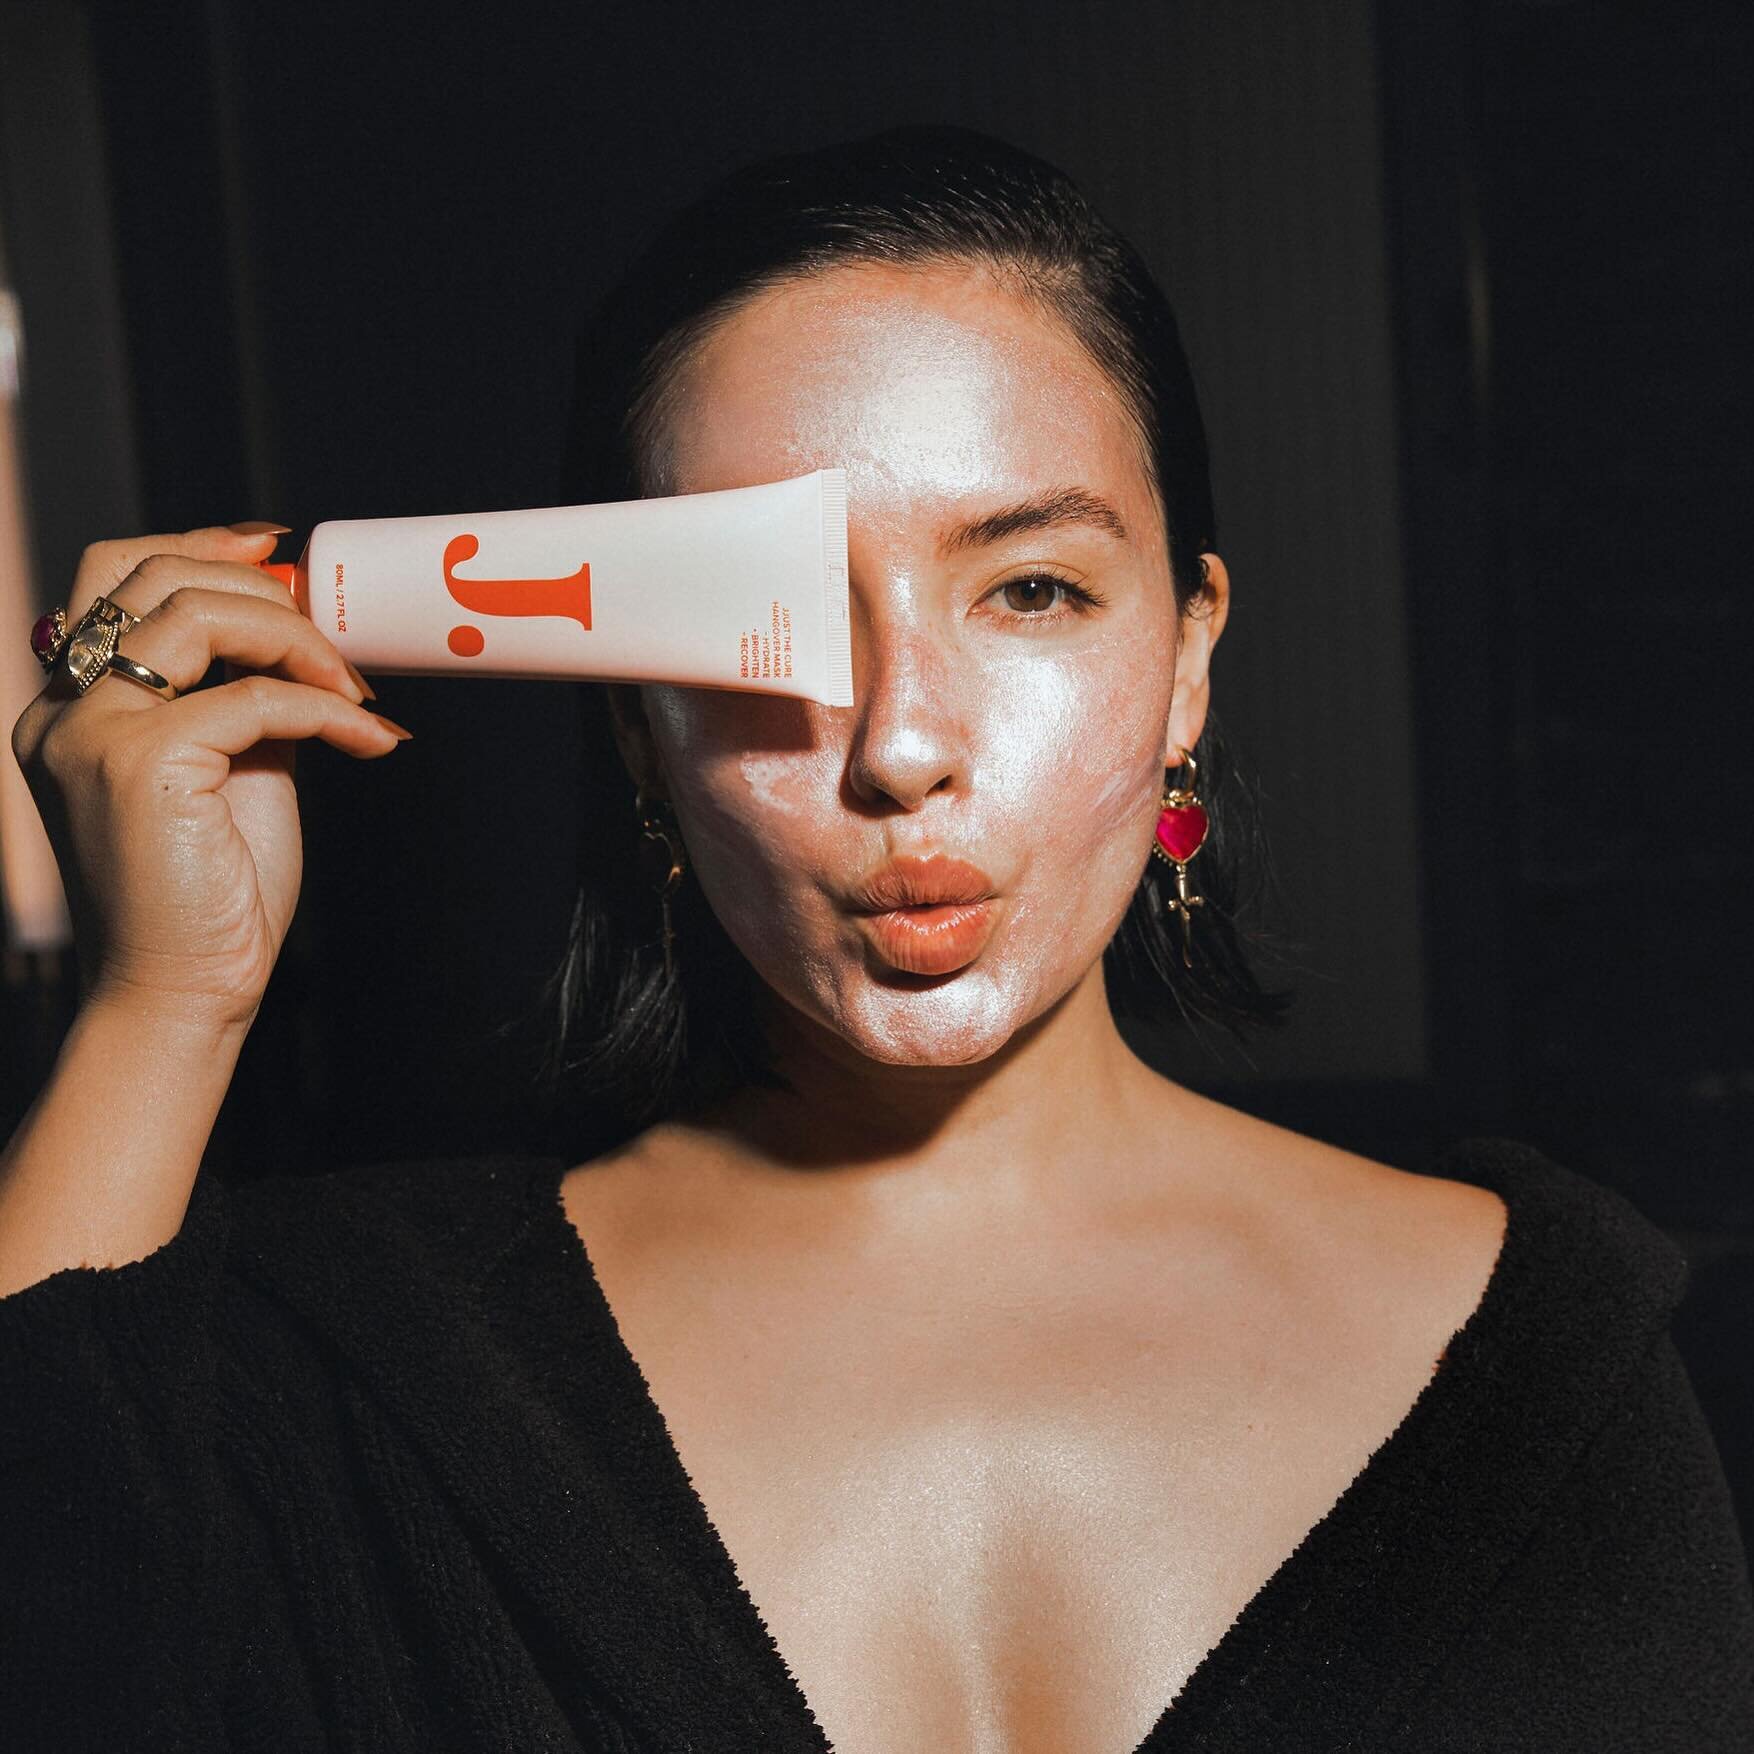 Get that glow gurl with @jjust.co The Cure Hangover Mask! 

Treat your skin to some much-needed TLC with Jjust The Cure Hangover Mask. 
Featuring a potent blend of Hyaluronic Acid and Vitamin C, this revitalizing formula works quickly to hydrate, plu